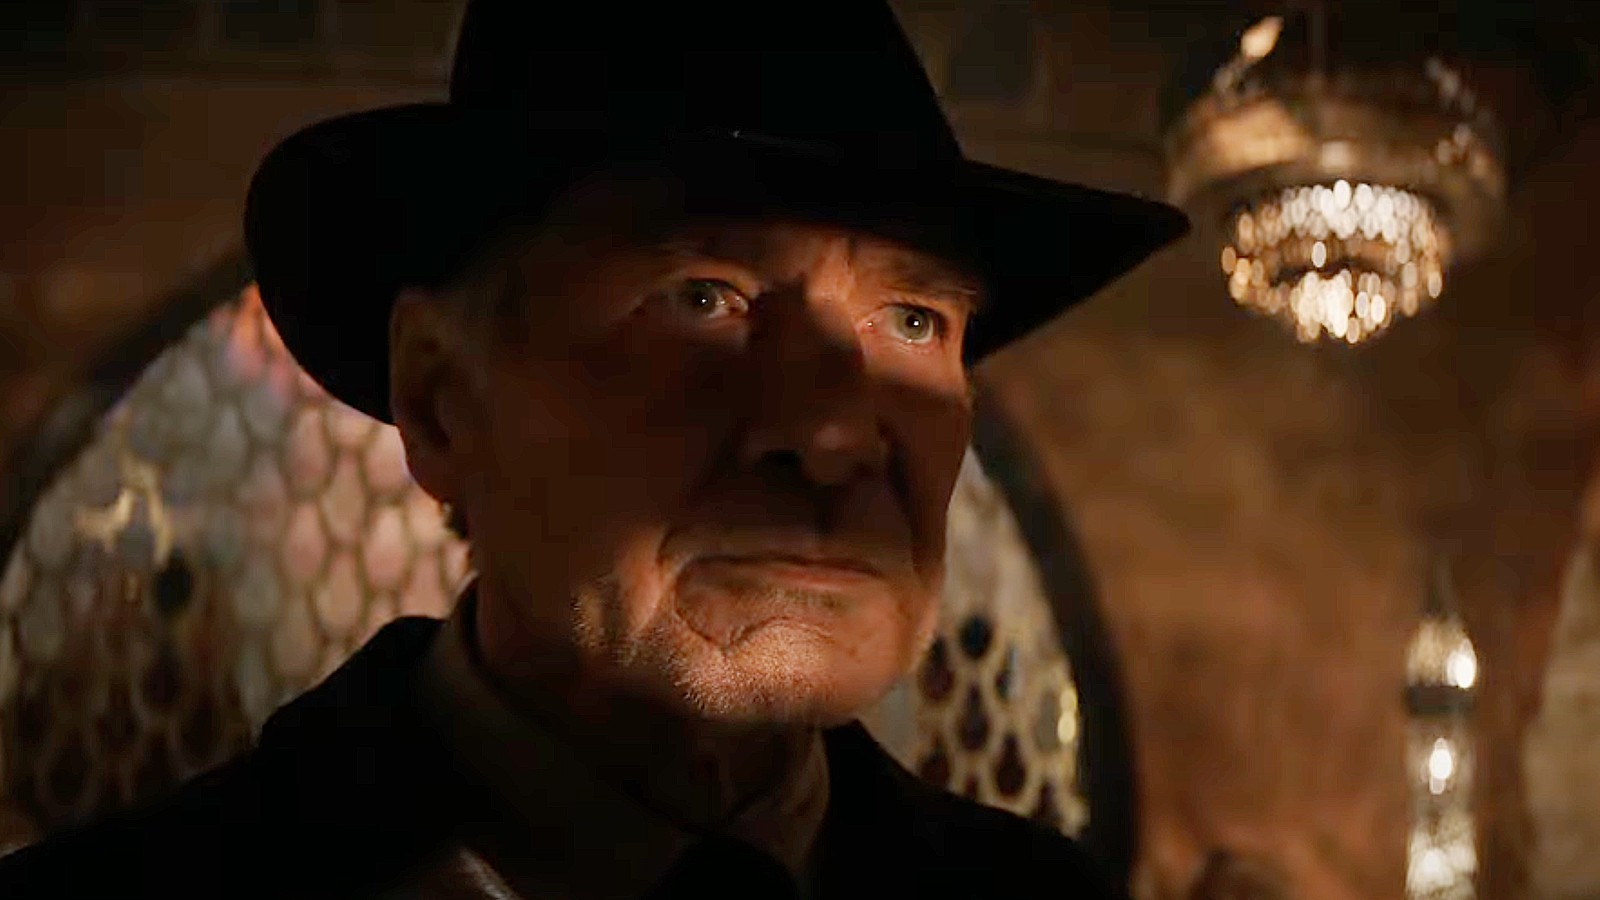 Fifth Indiana Jones movie releases first trailer and title, Movies